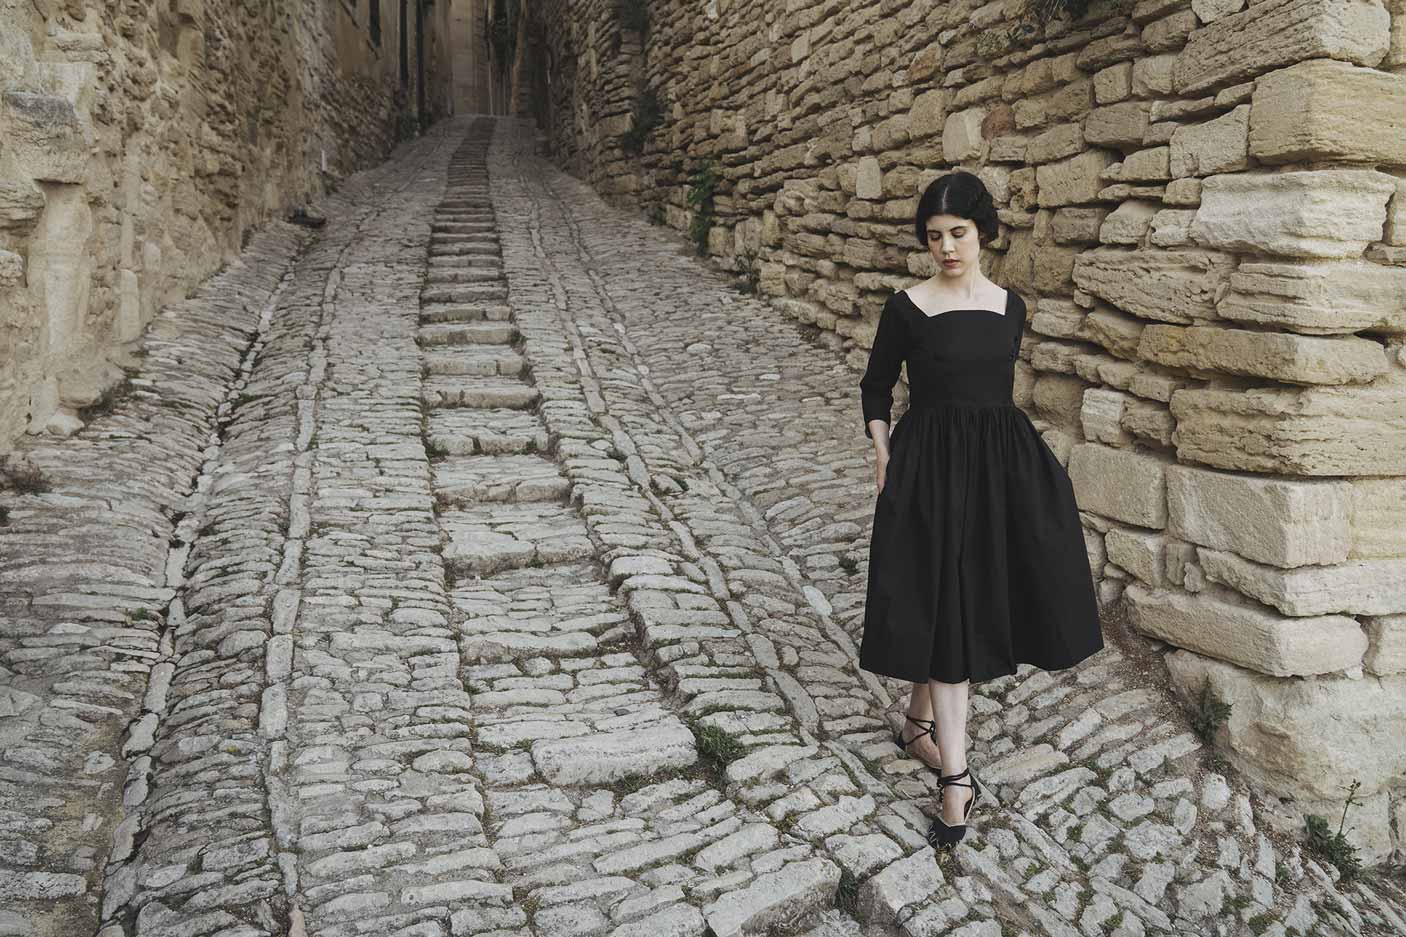 Louise wearing Amalia Black luxury cotton Dress by Thierry Colson photographed by Jamie Beck